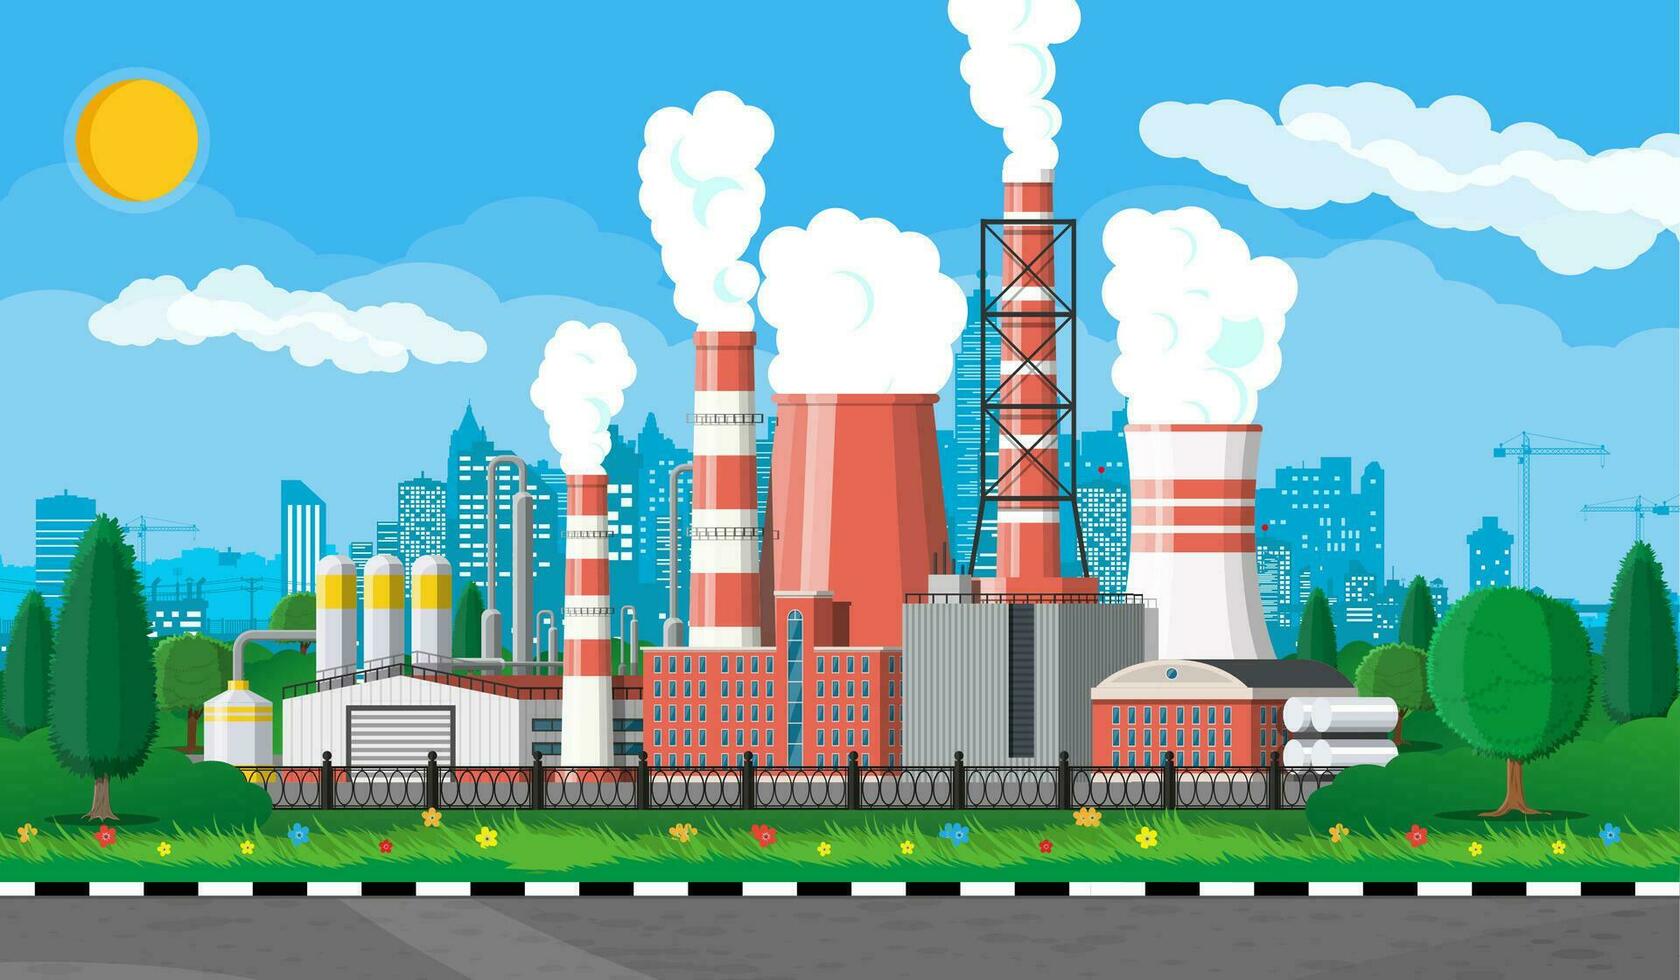 Factory building. Industrial factory, power plant. Pipes, buildings, warehouse, storage tank. Cityscape urban skyline with clouds, trees and sun. Vector illustration in flat style